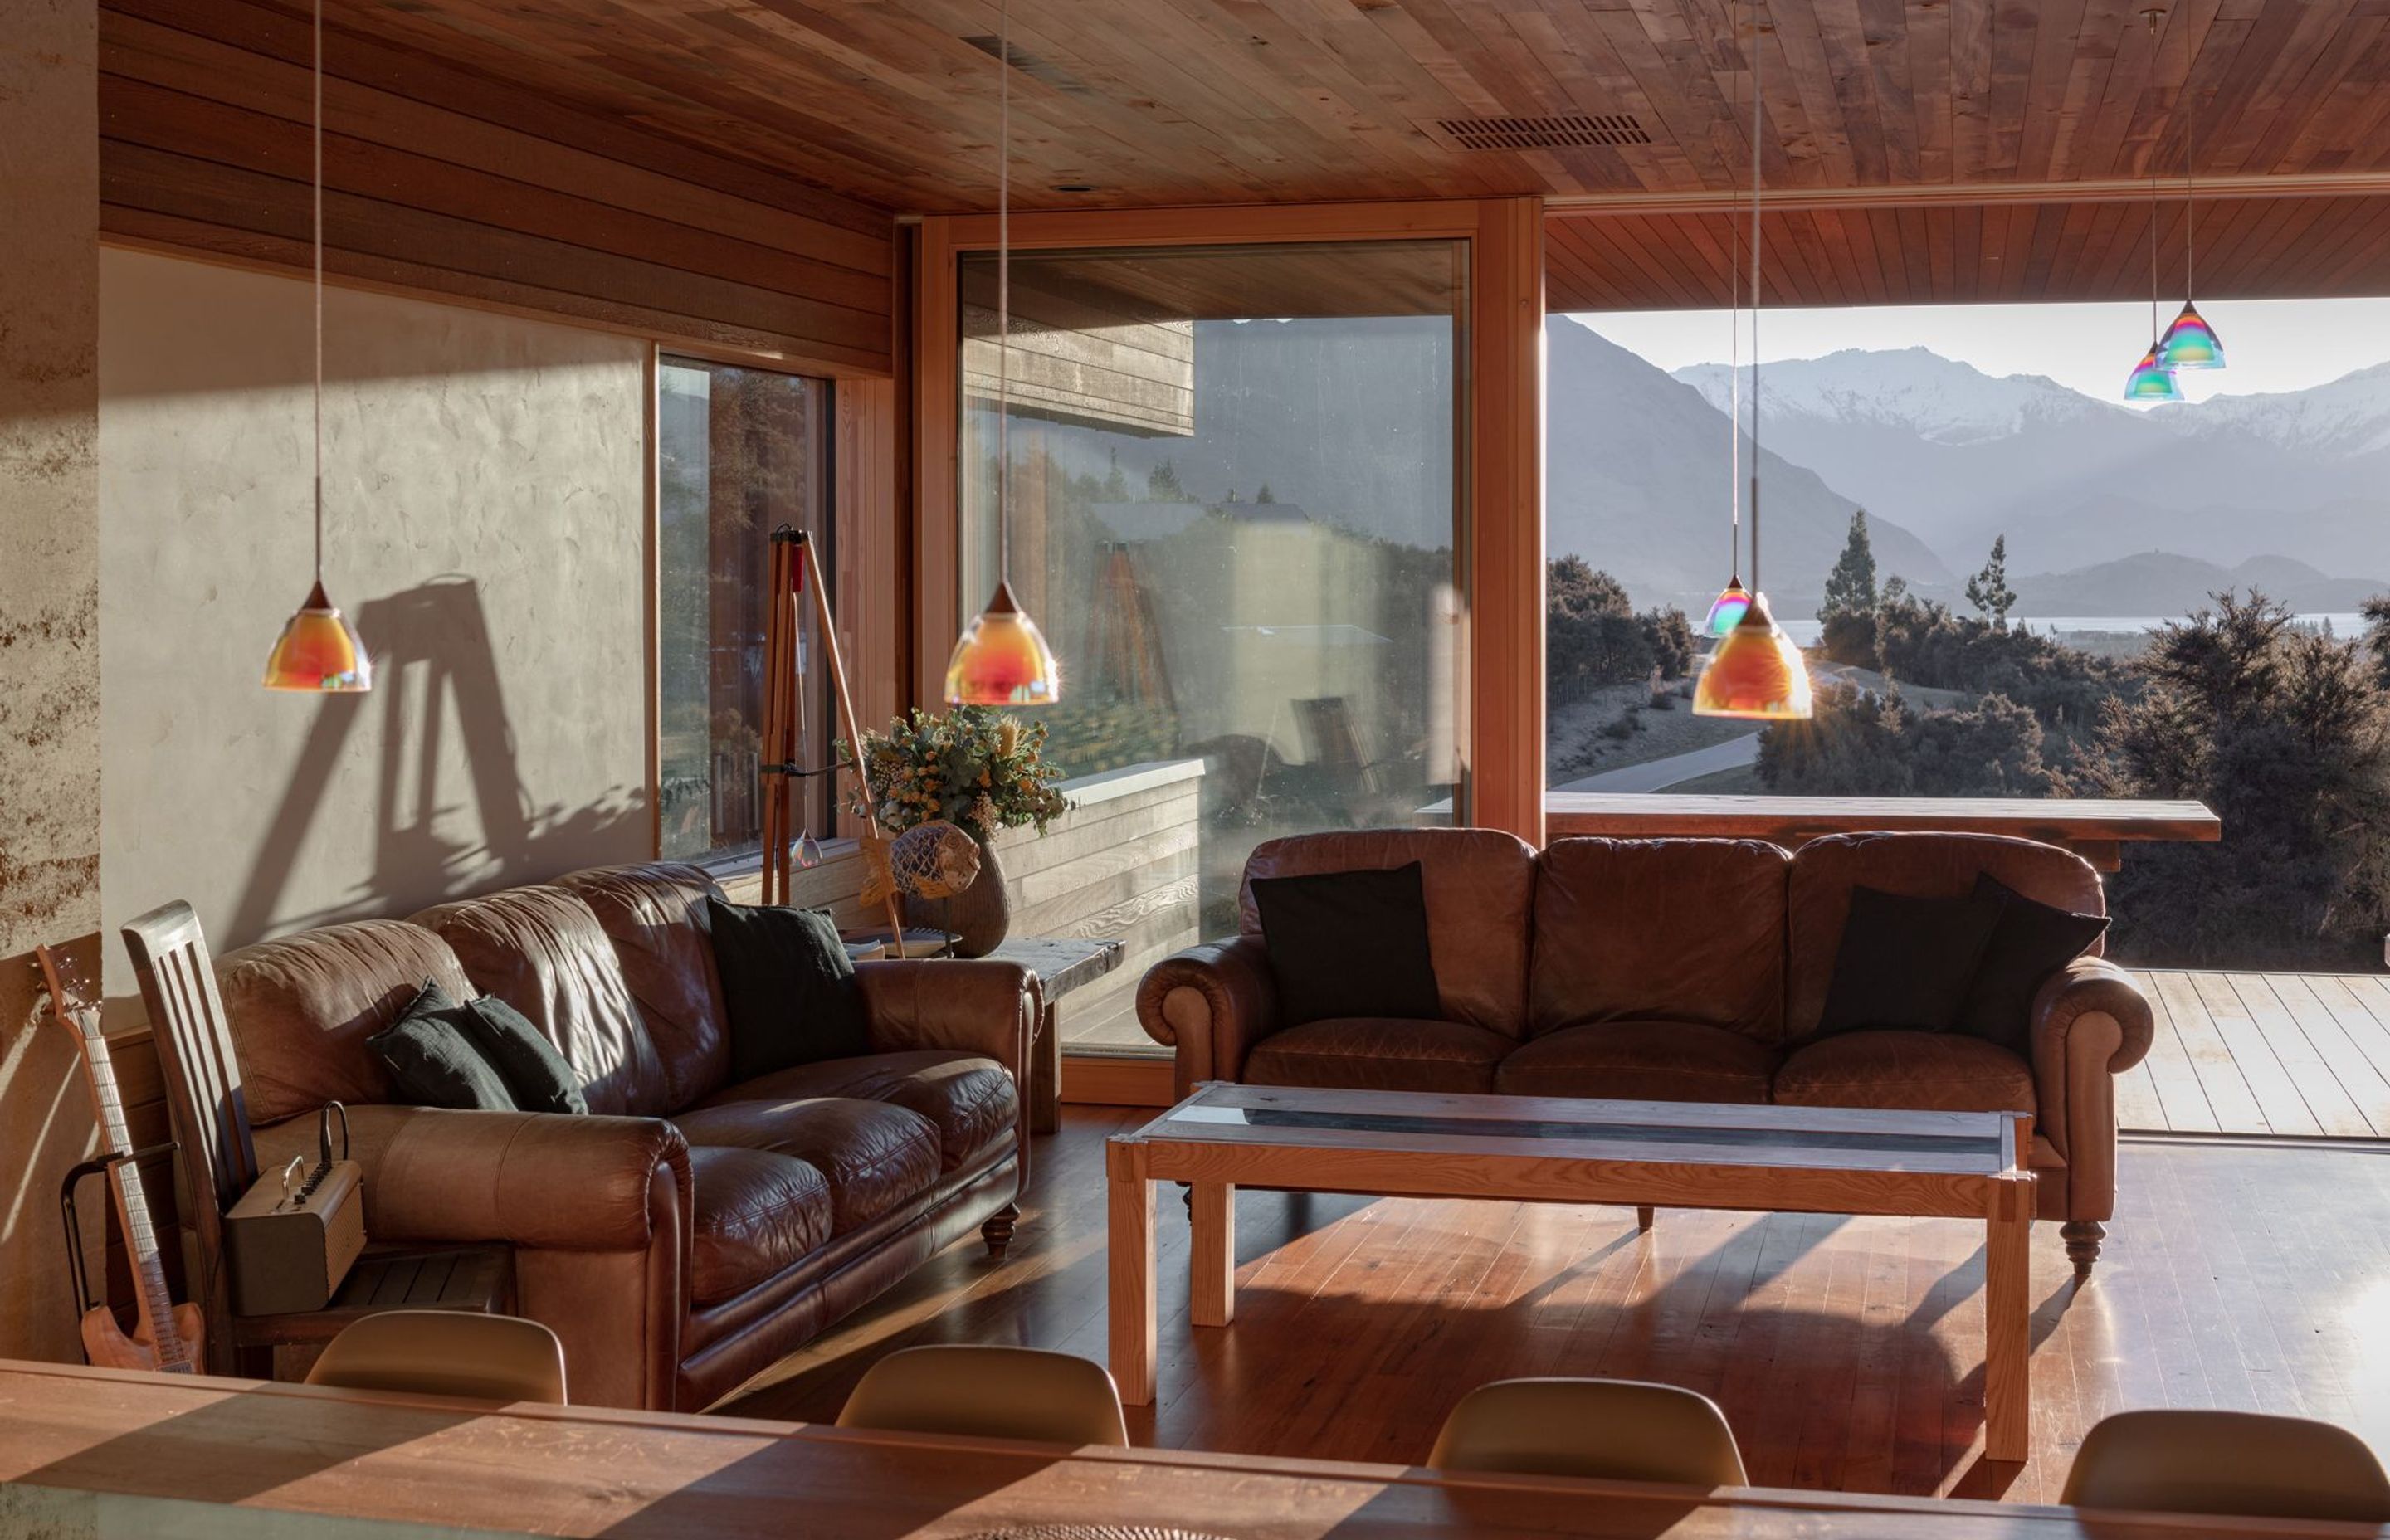 Large, triple-glazed doors in recycled Siberian larch joinery help moderate the internal temperature while maintaining access to the lake and mountain views.